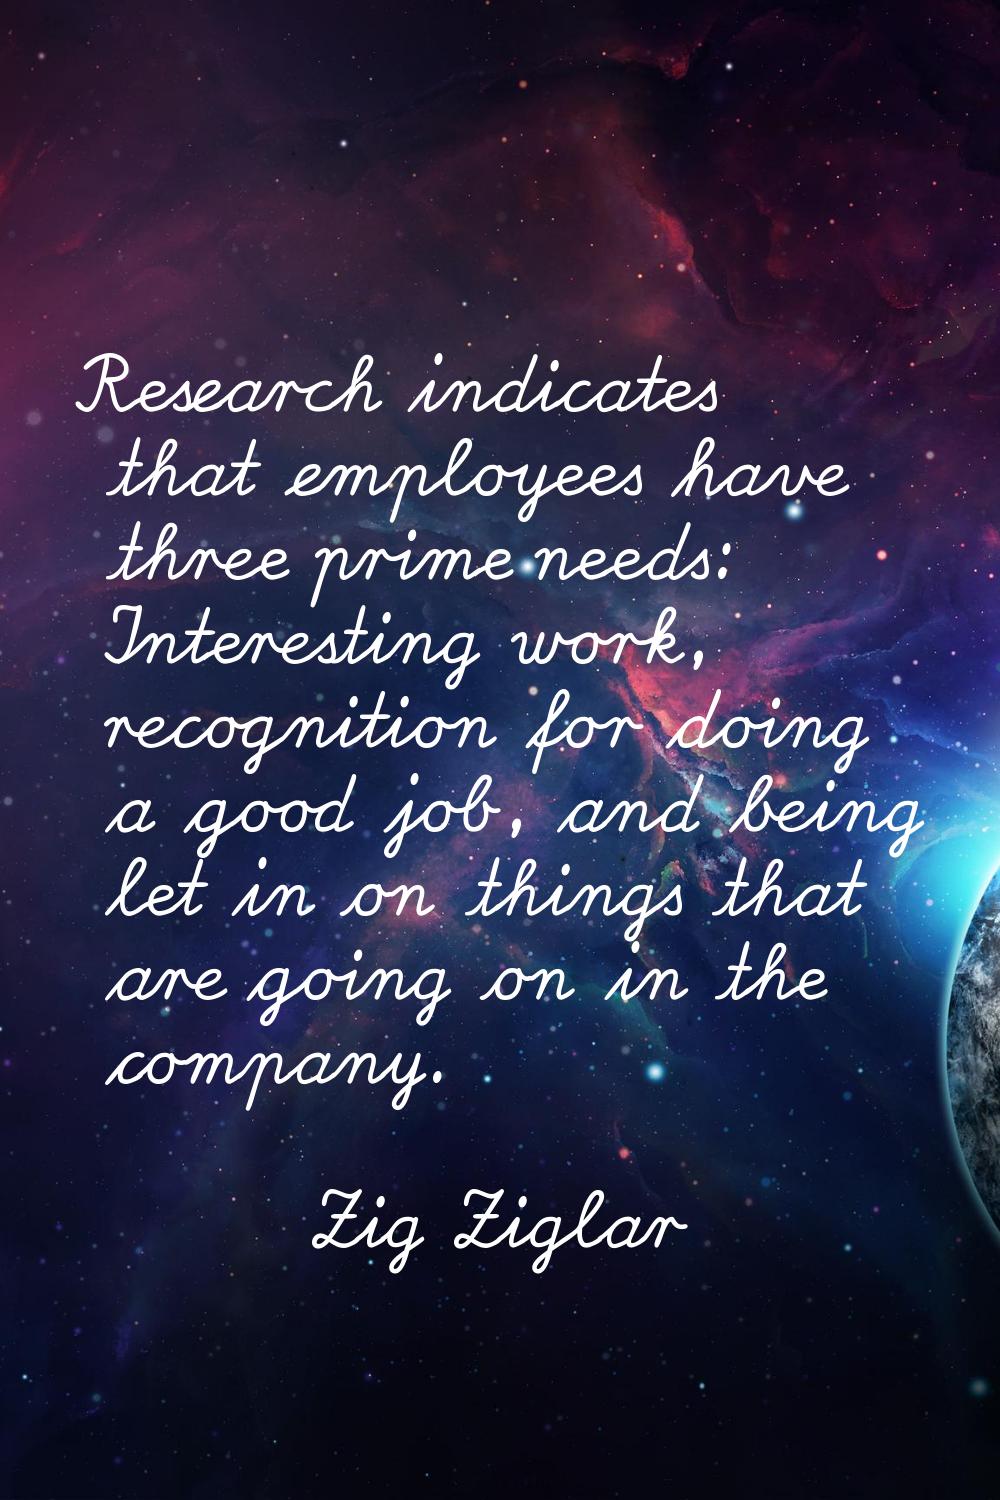 Research indicates that employees have three prime needs: Interesting work, recognition for doing a